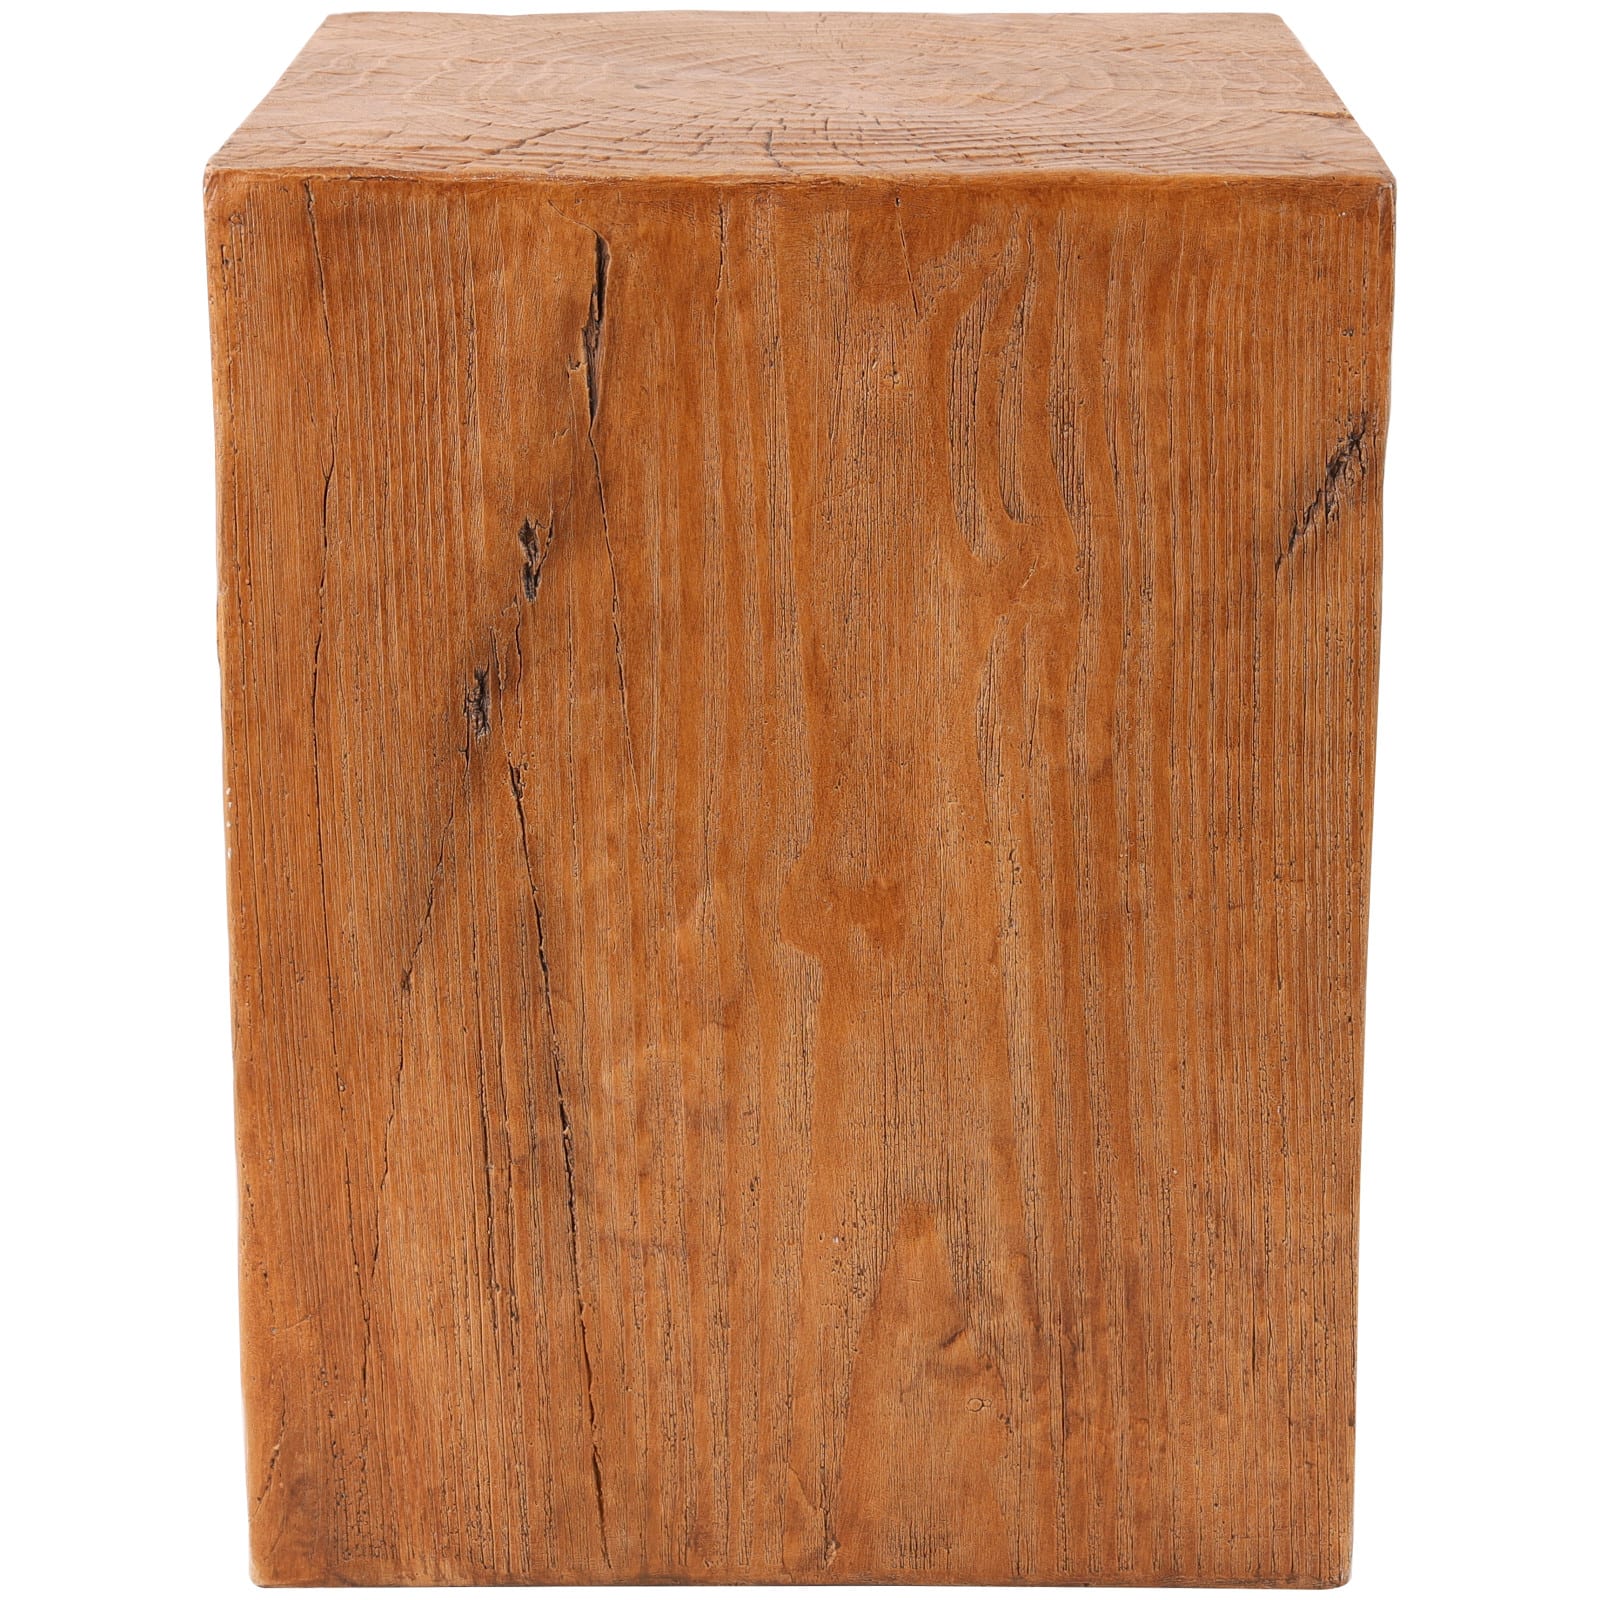 18" Natural Textured Wood Grain Outdoor Accent Table